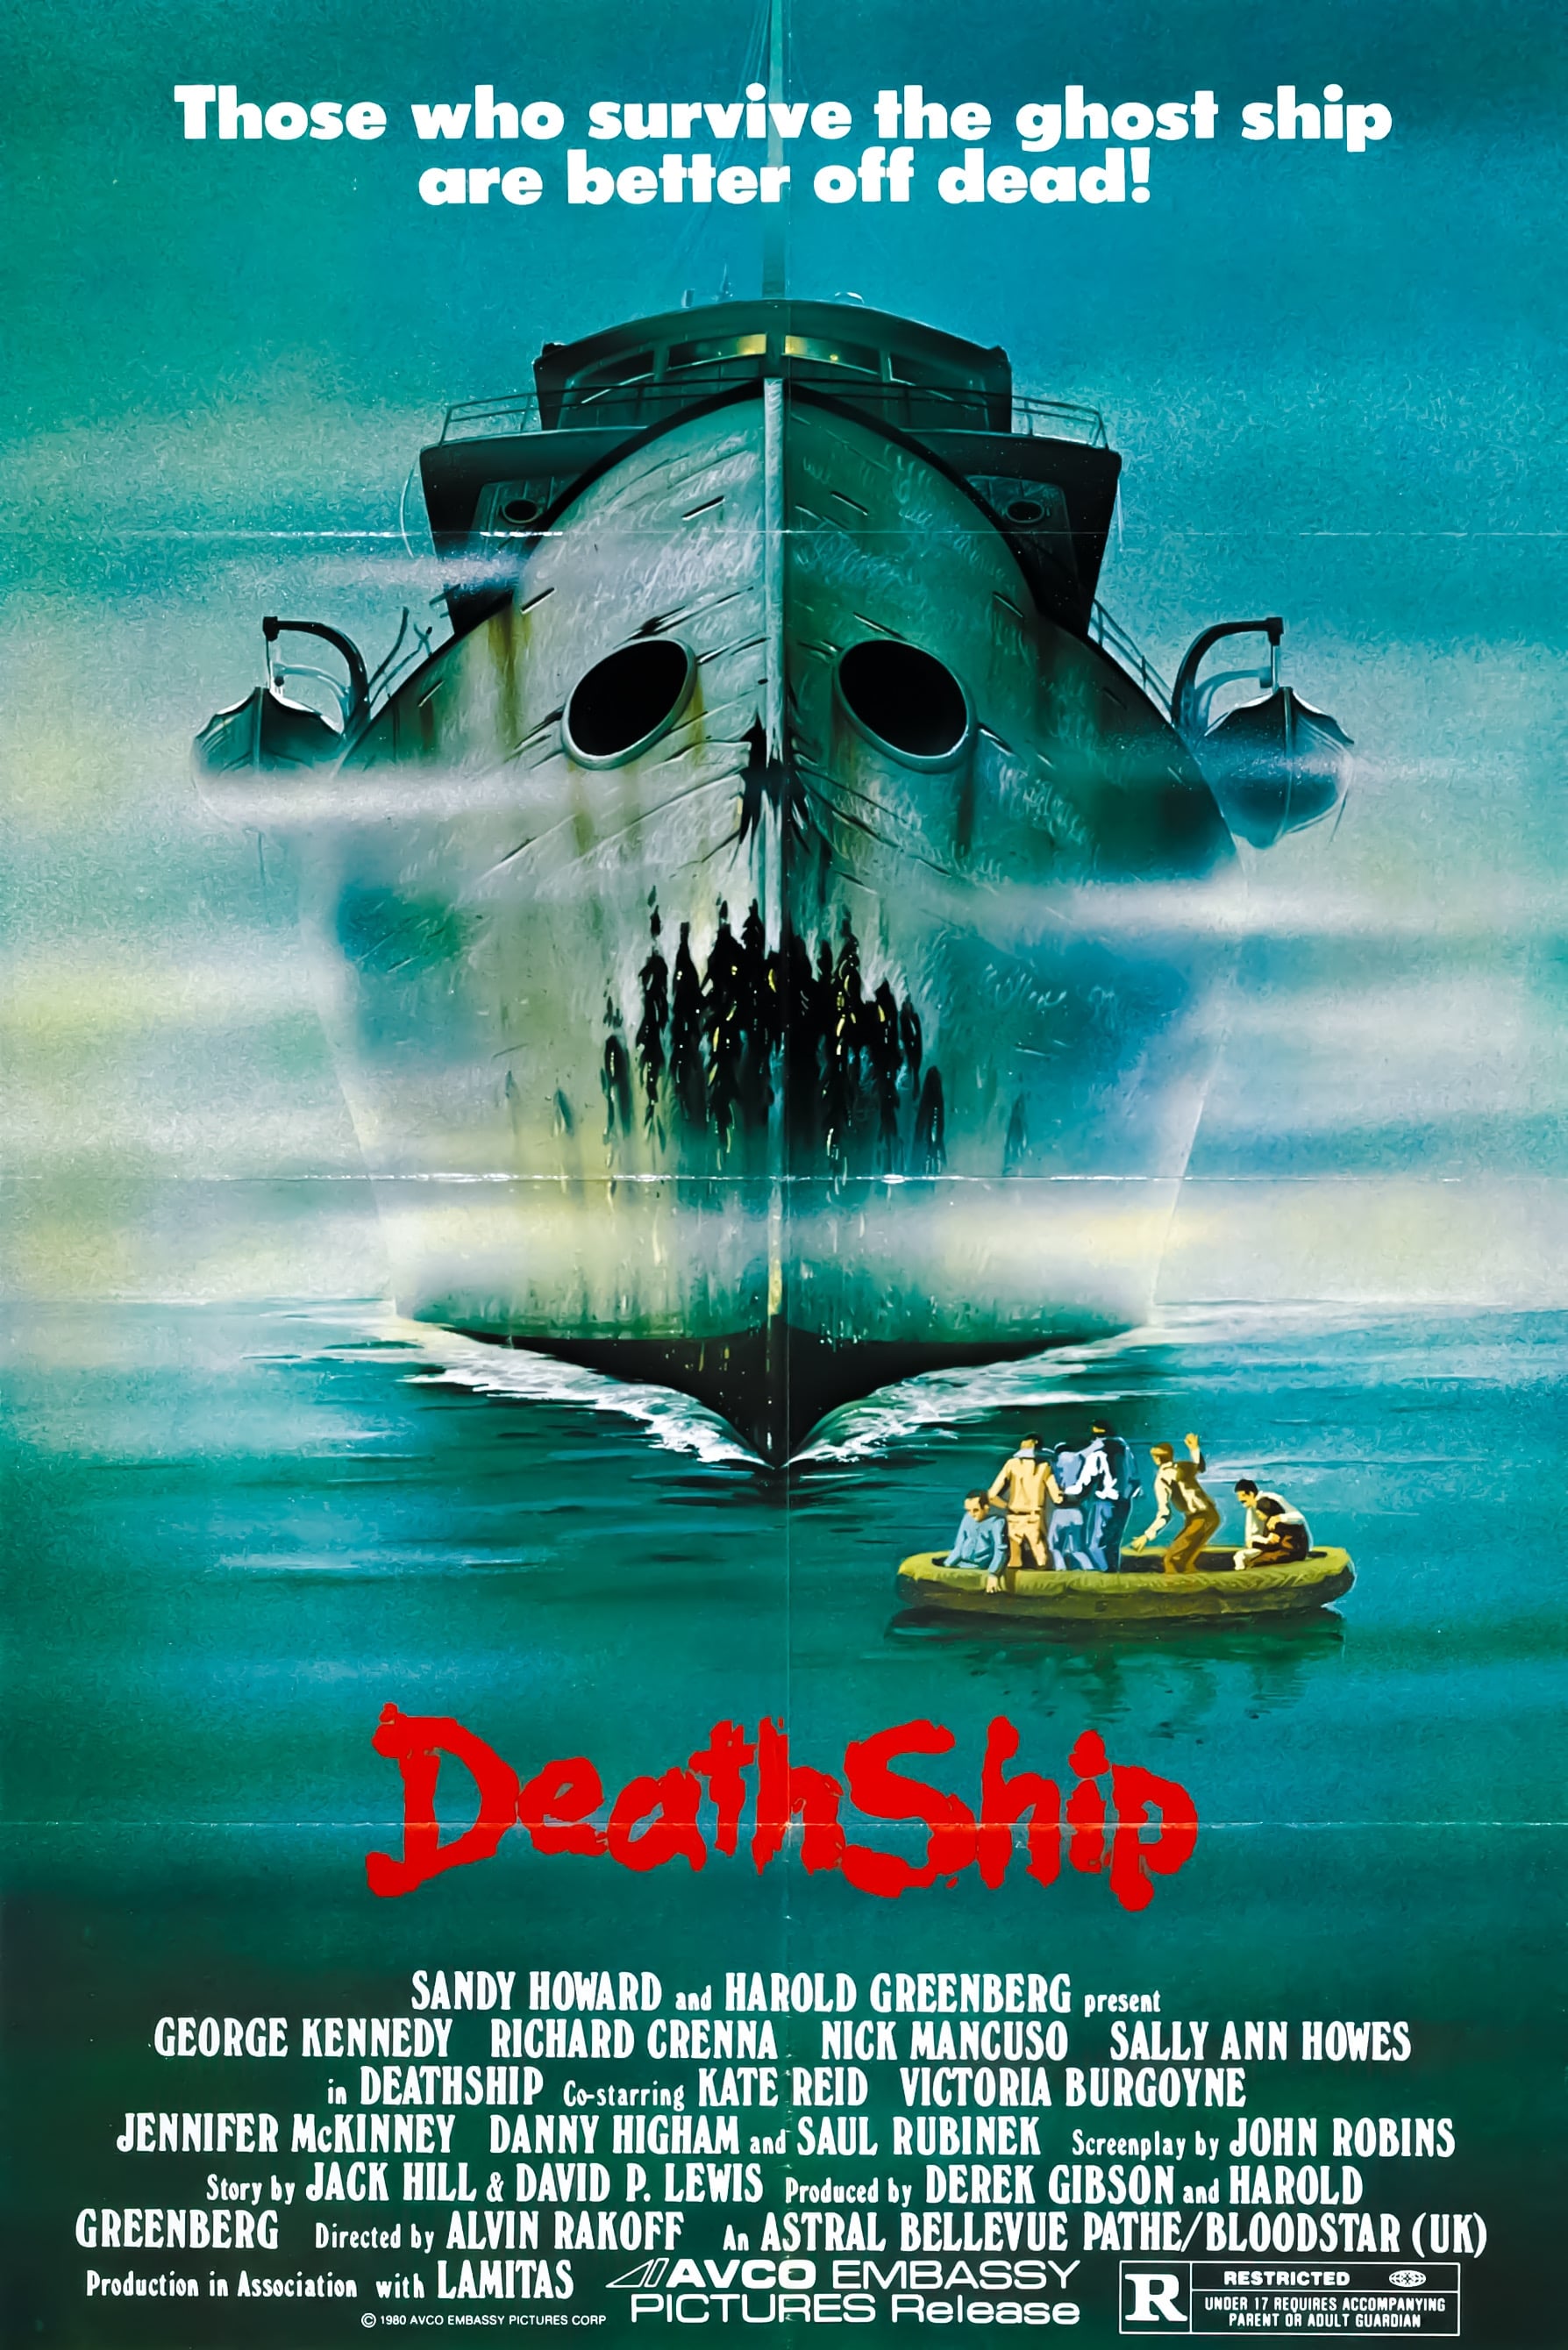 movie with cruise ship horror